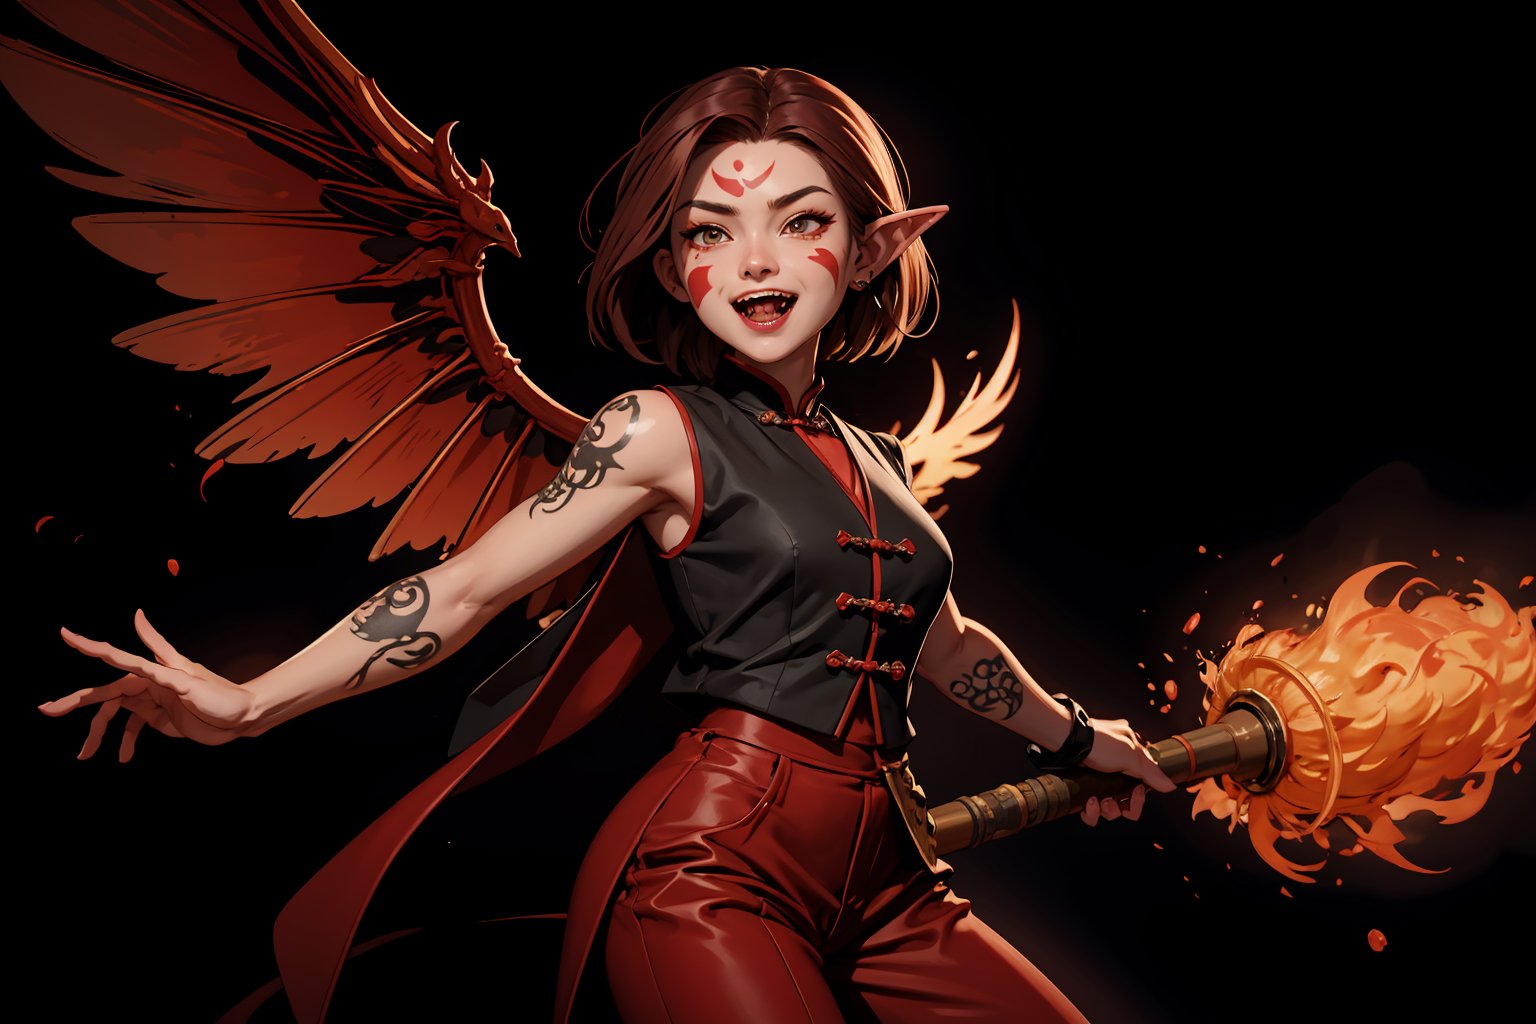 Chinese mythology, solo, 1female, monster_girl, short hair, dark red hair, (facial marks), fierce face, evil face, fangs, sexy lips, (pointed ears), (dark skin), strong body, (phoenix tattoo), (a single wing behind:1.2), (giggle:1.2), dark red vest, long pants, holding a mace, Chinese martial arts animation style